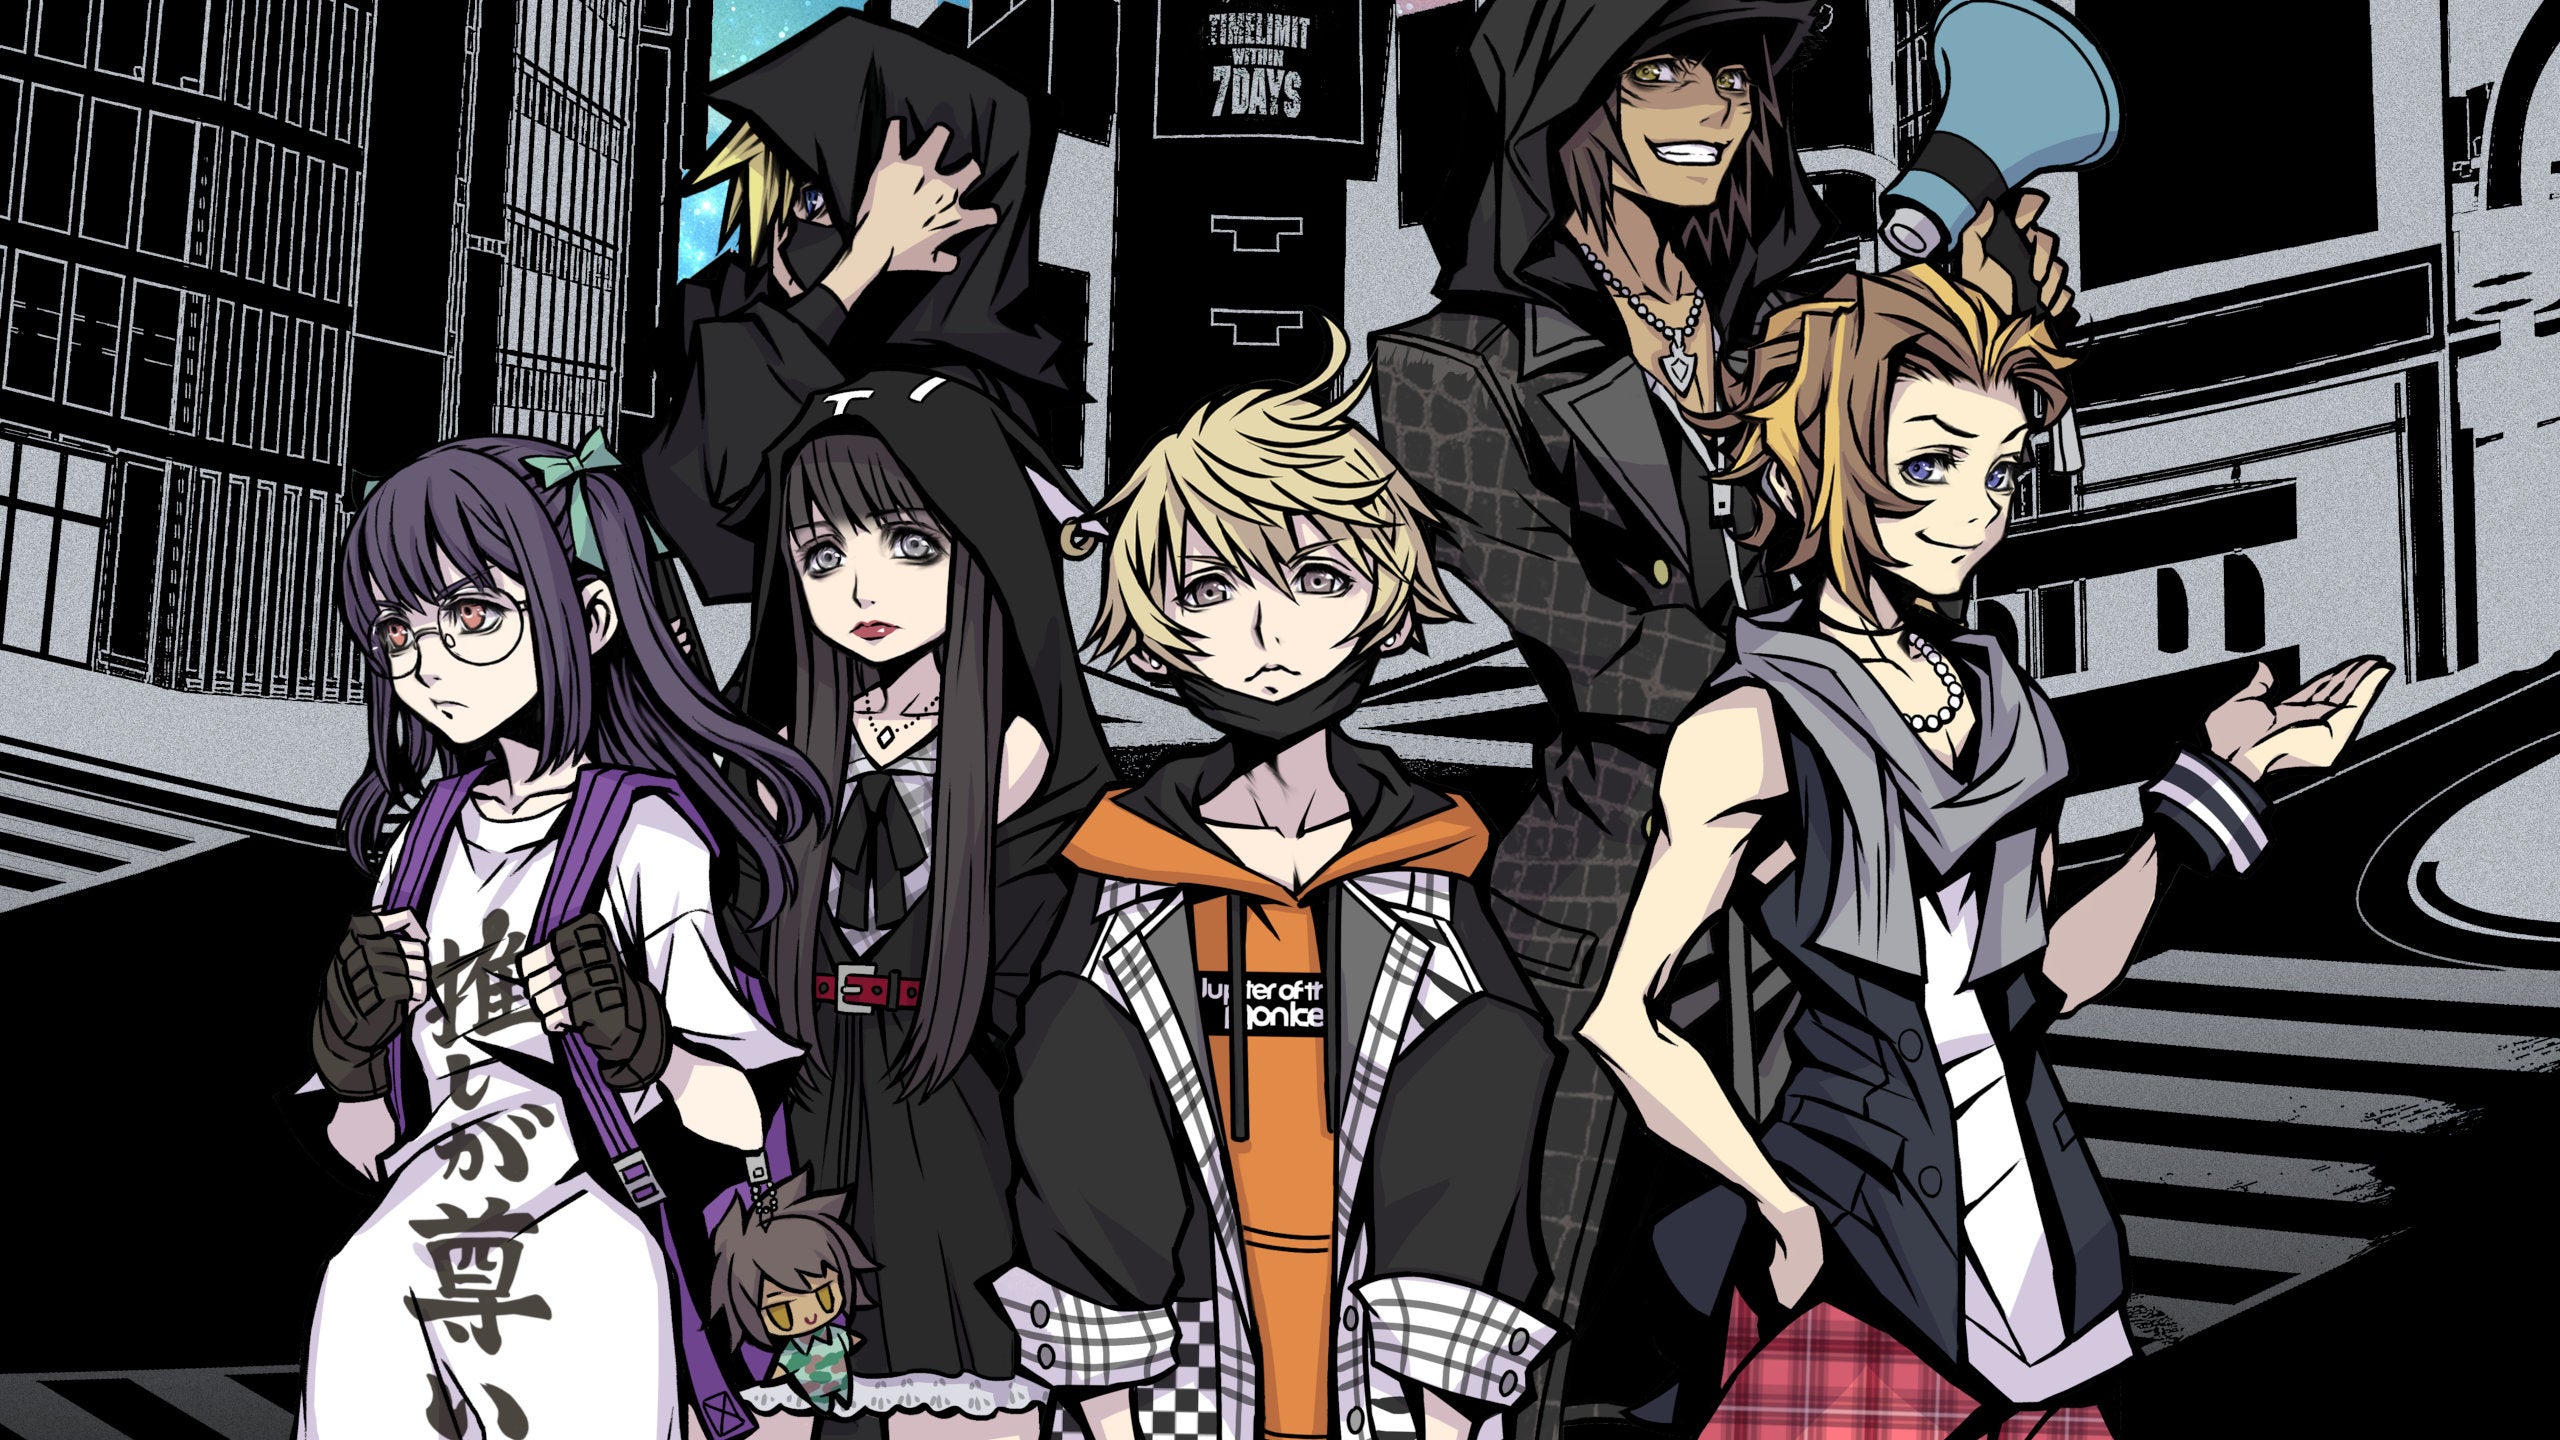 The gang pose in Neo: The World Ends With You's key art.